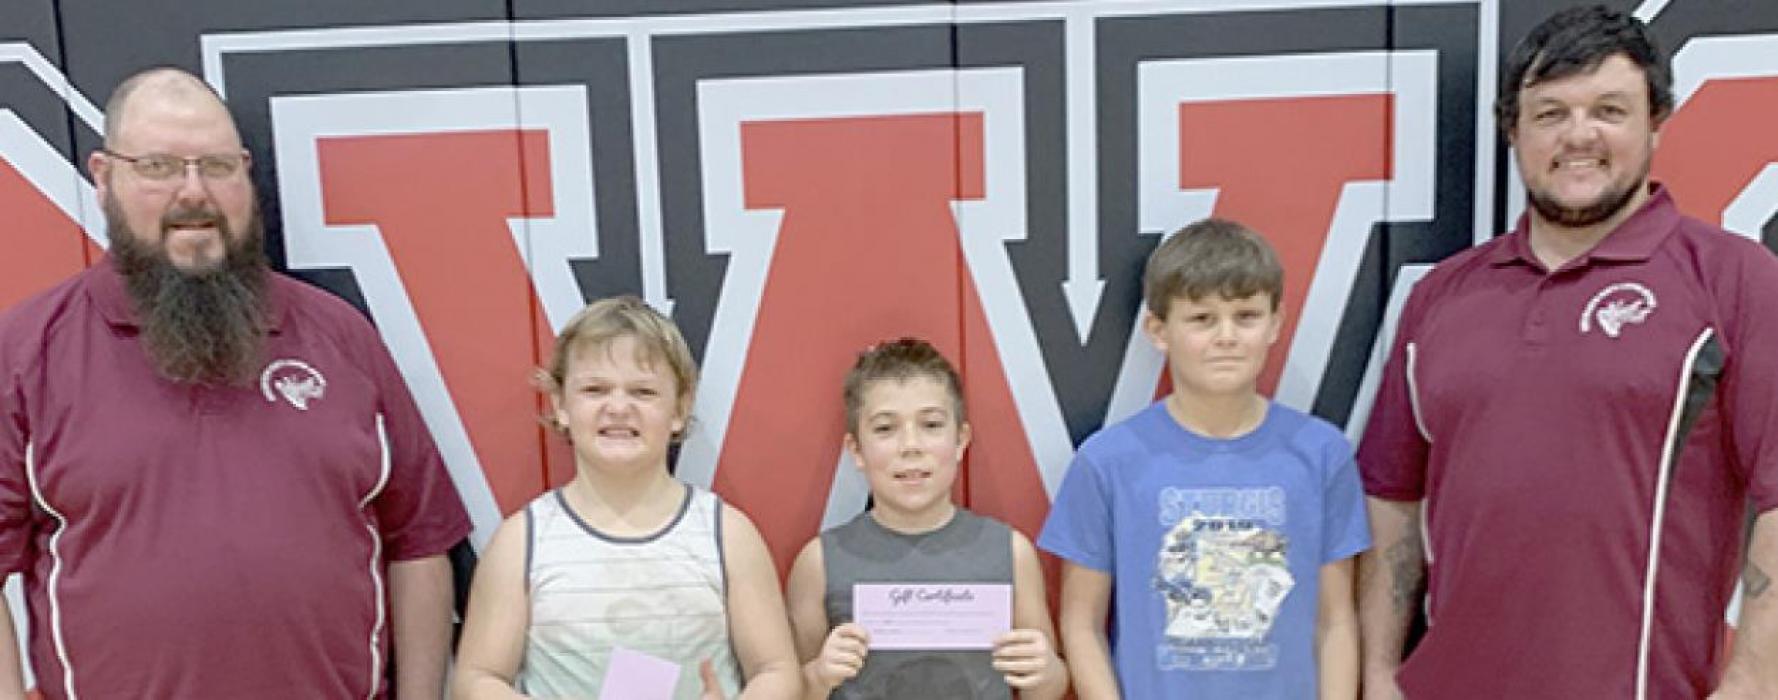 The Boys 10-11 Year Old Division was won by Andrew Johnson (left). Zaine Evans (right) took second place and Nathan Fernau (center) took third place.